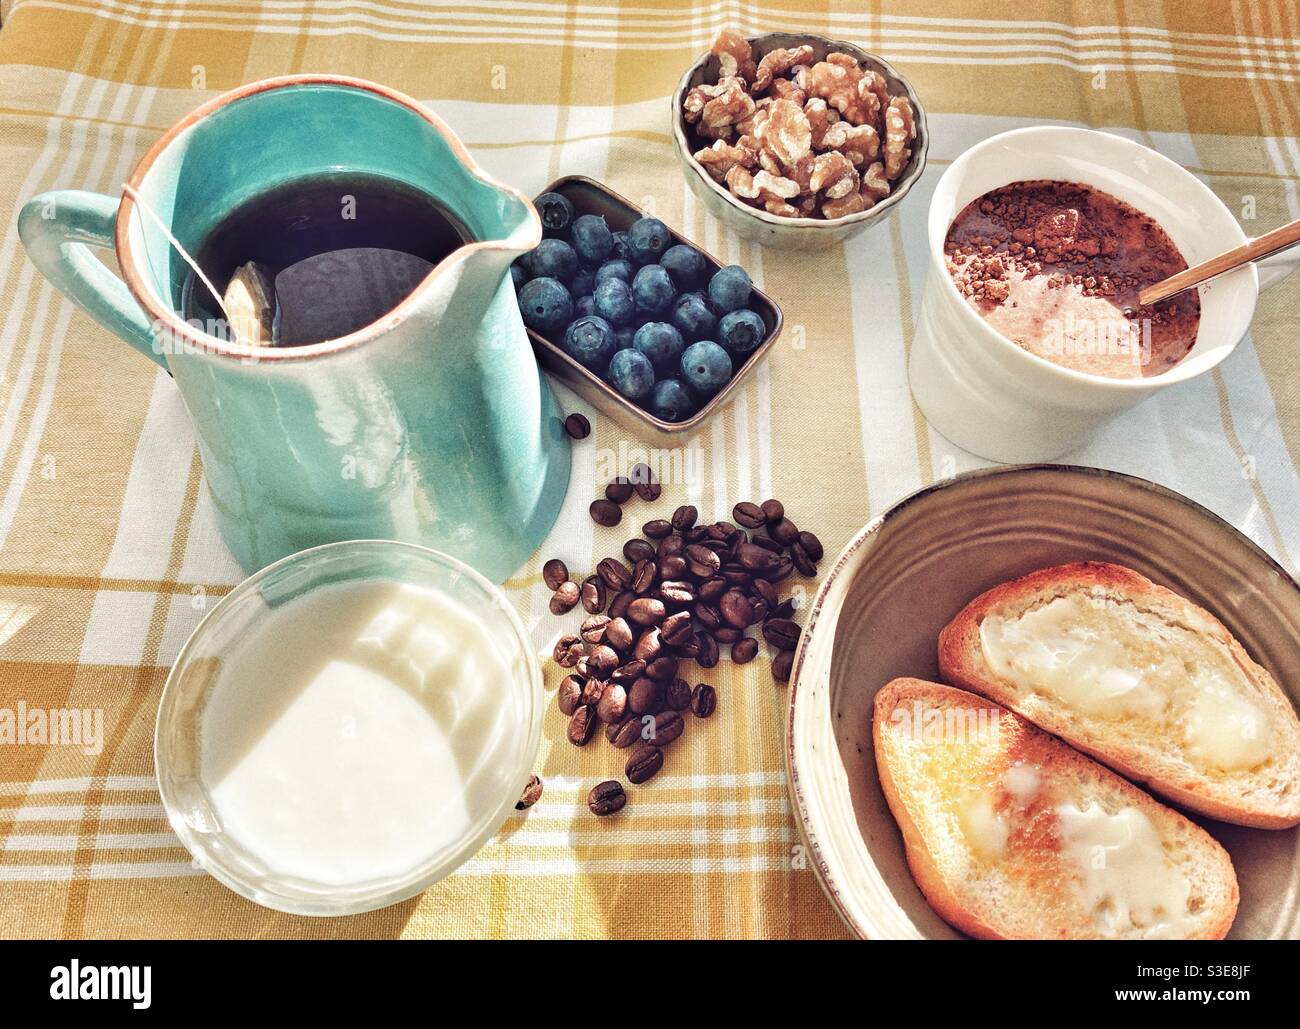 Relaxing breakfast with toast, tea, cranberries, walnuts and yummy stuff Stock Photo